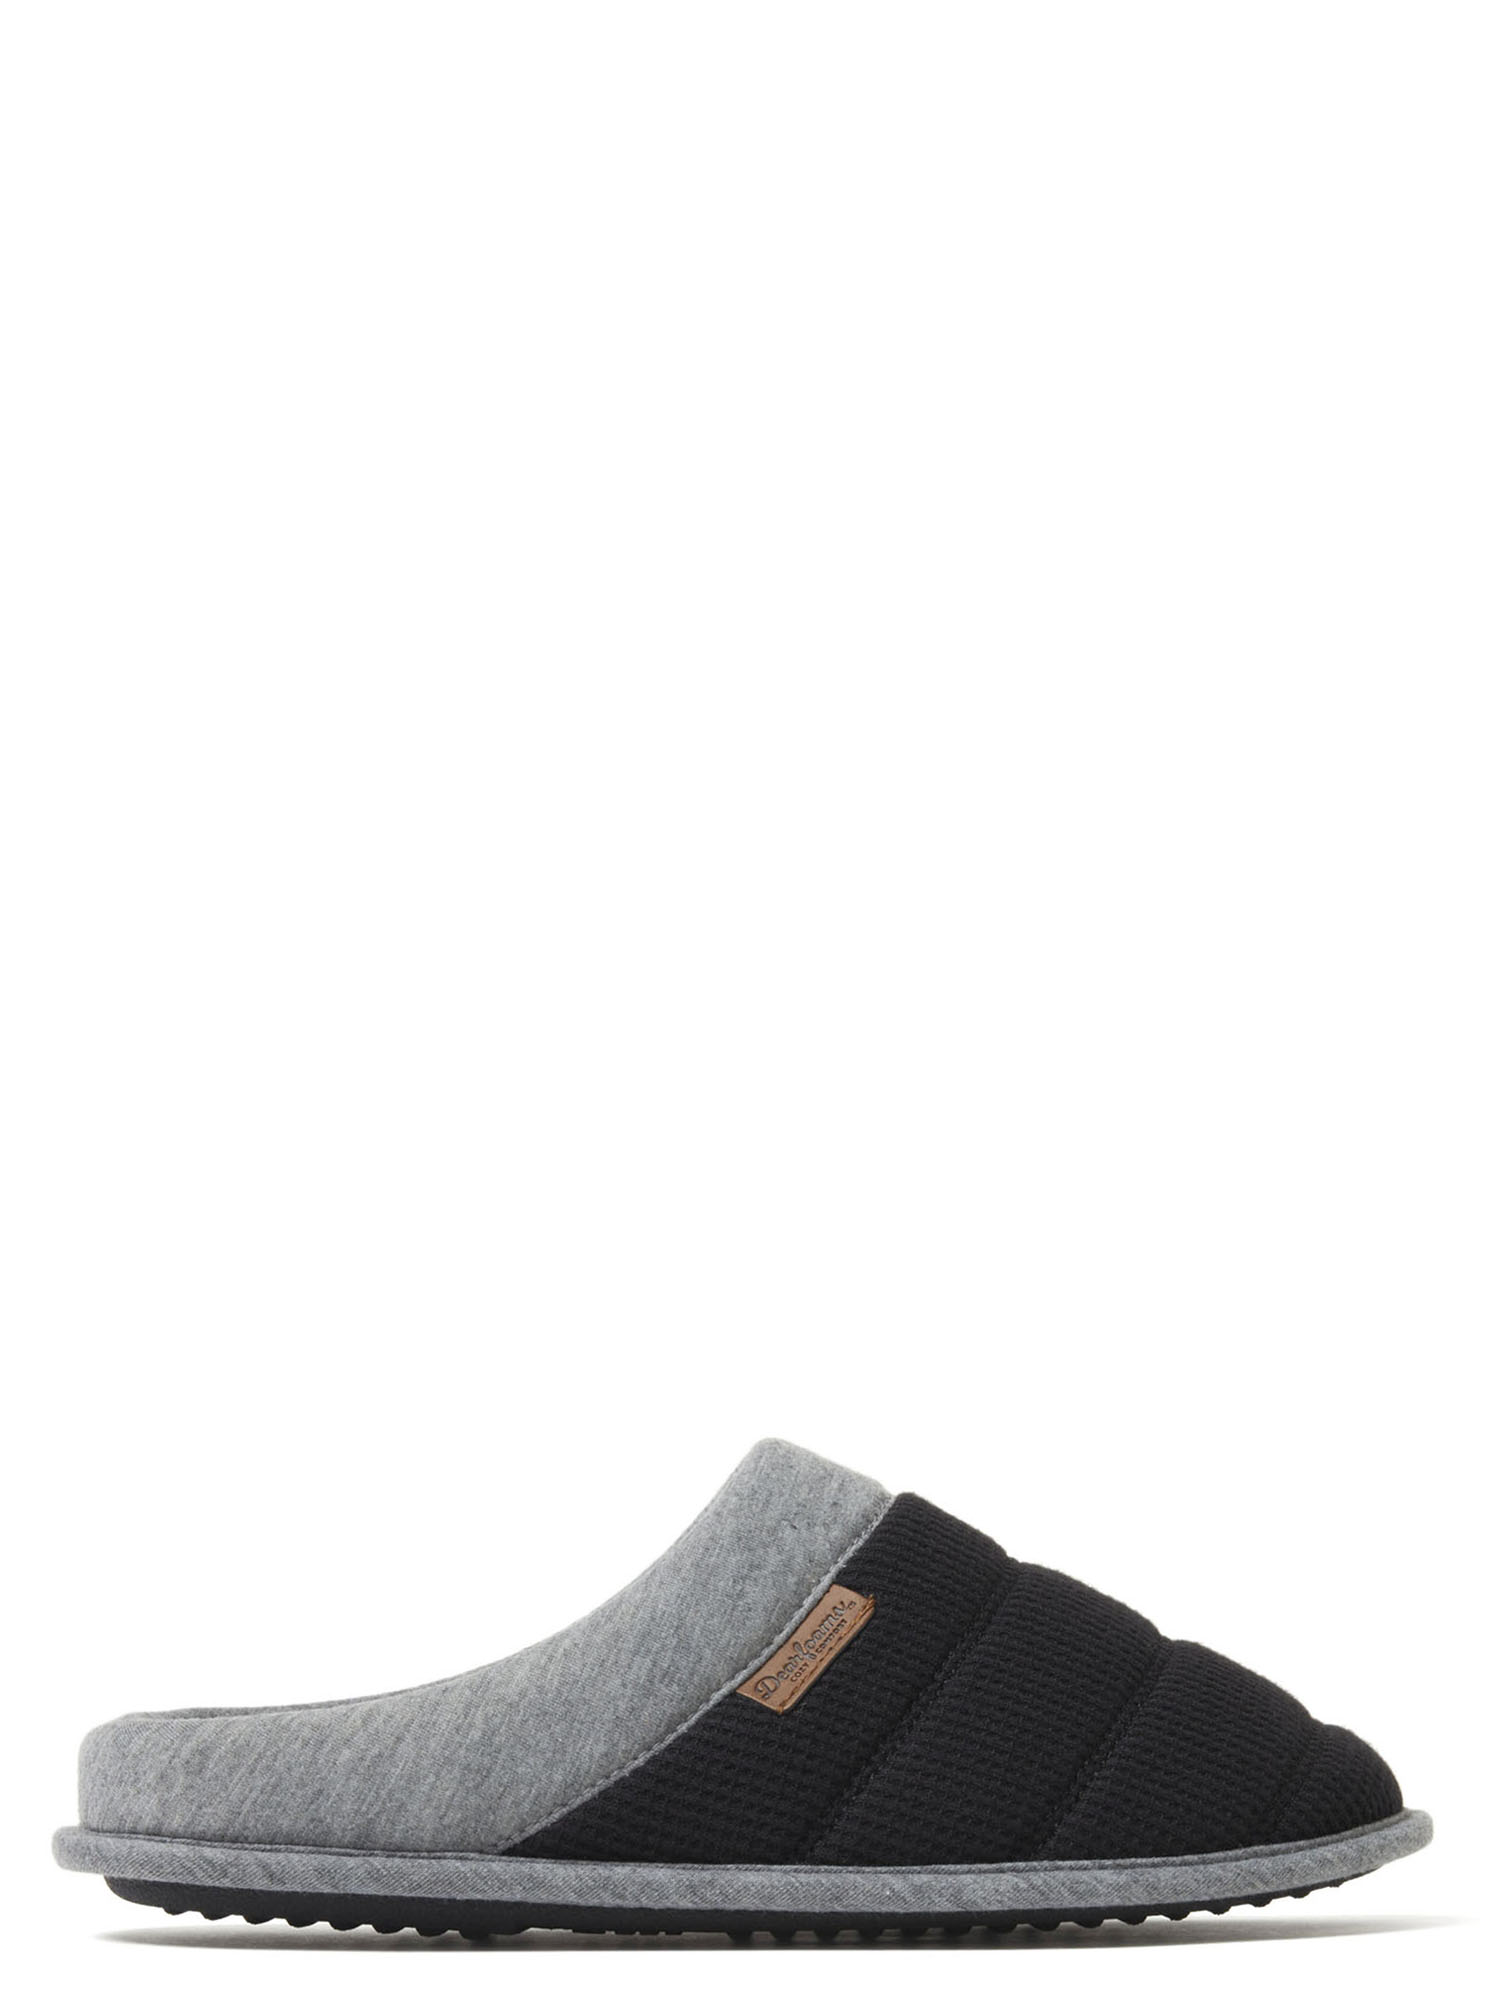 Dearfoams Cozy Comfort Men's Bound Knit Clog Slippers - image 1 of 5